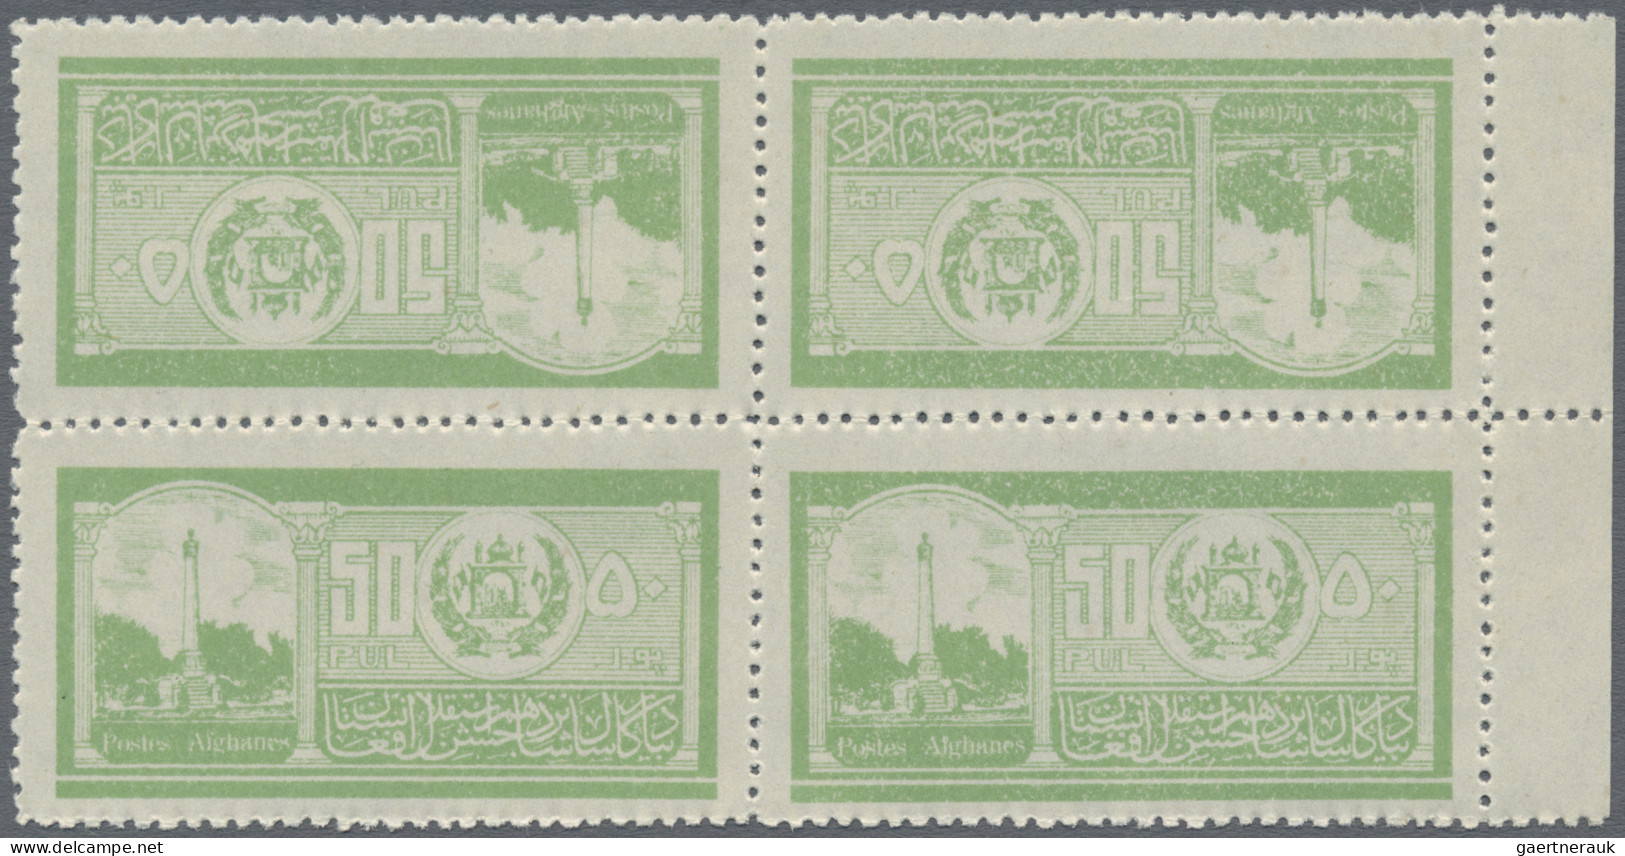 Afghanistan: 1934, Independence, 52 Tete-beche Pairs, Mint Without Gum As Issued - Afghanistan